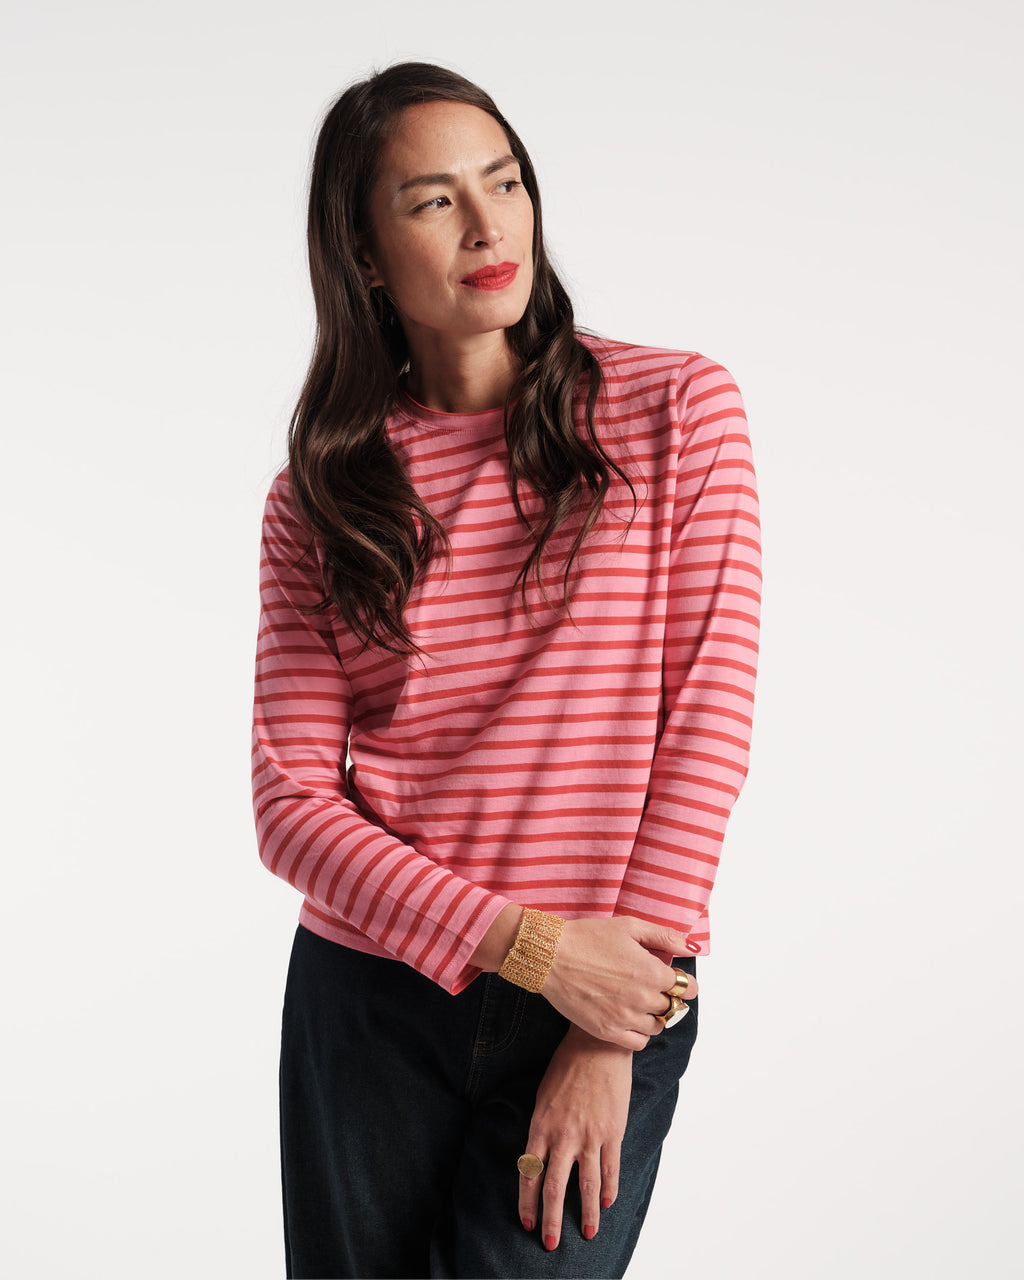 Long Sleeve Striped Tee Shirt Pink Red